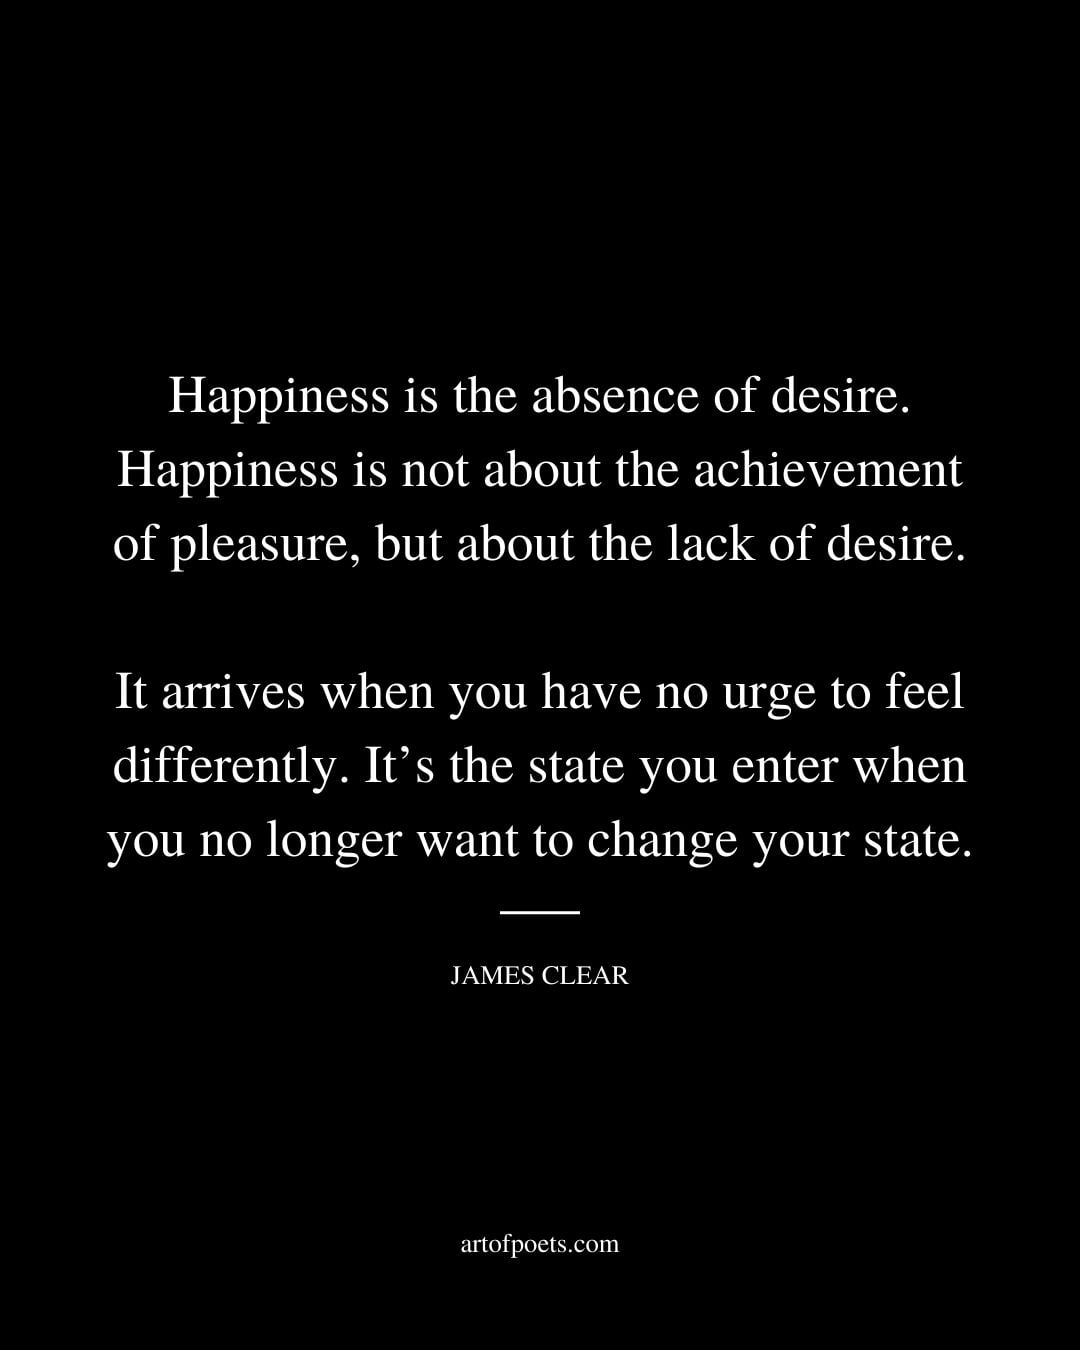 Happiness is the absence of desire. Happiness is not about the achievement of pleasure but about the lack of desire